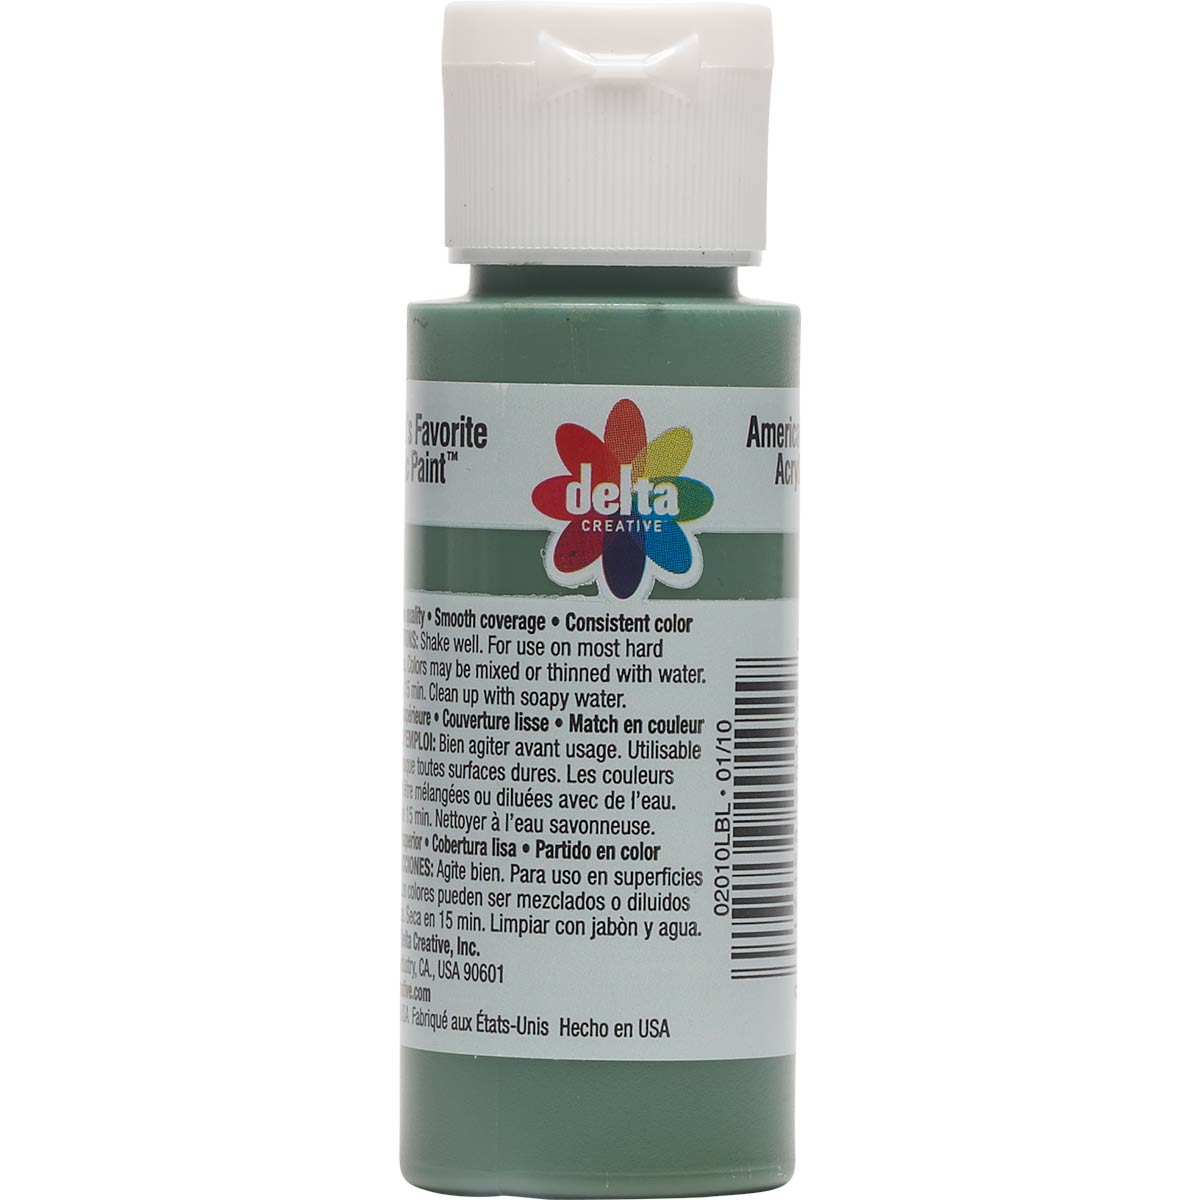 Delta Ceramcoat Acrylic Paint - Forest Green, 2 oz. - 020100202W